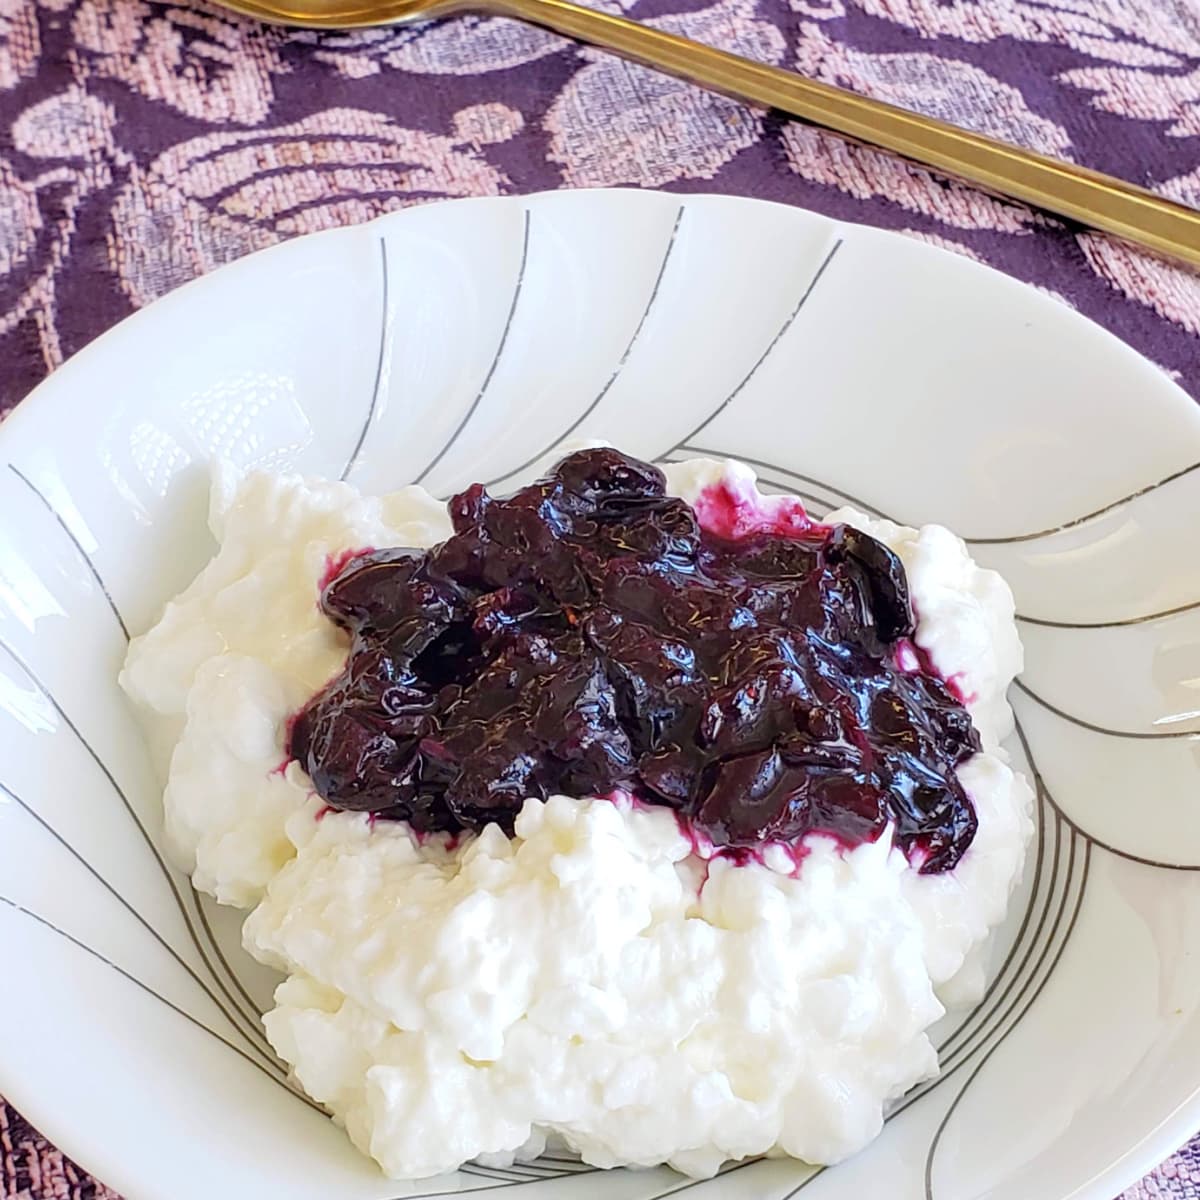 Blueberry Hatch Chile Chutney on cottage cheese in a white bowl on a purple brocade placemat